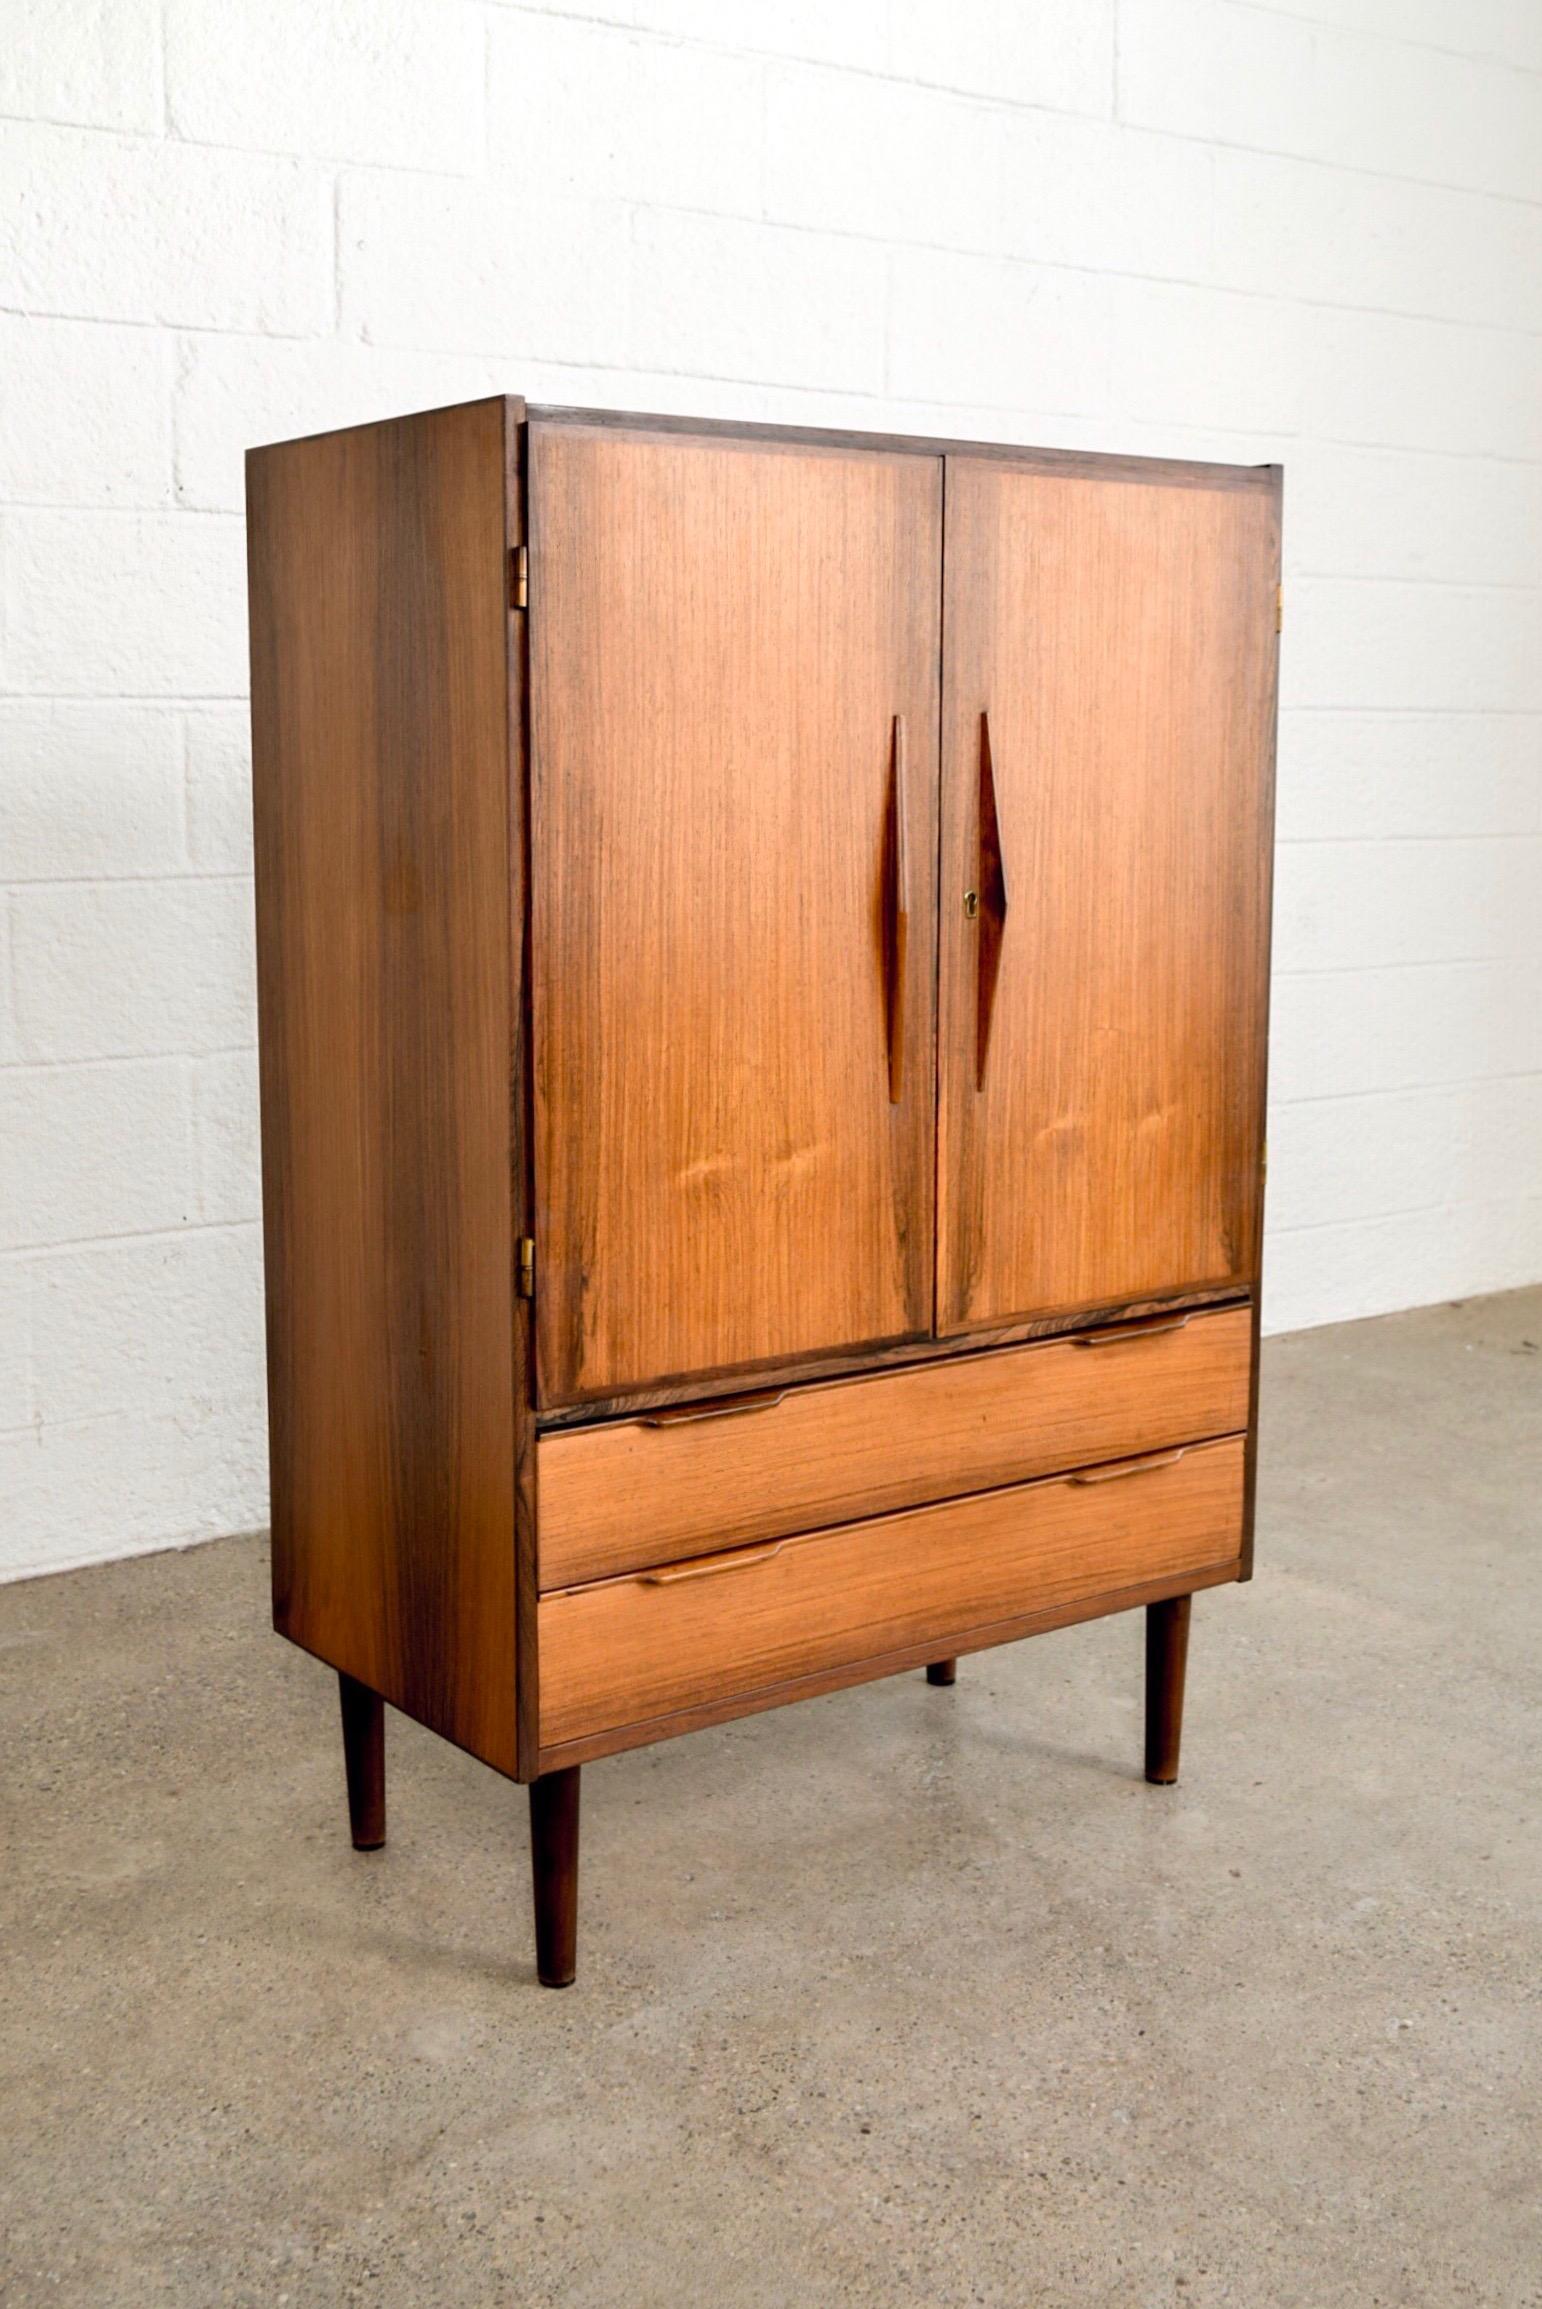 Mid-20th Century Midcentury Danish Modern Rosewood Bar Cabinet, 1960s For Sale